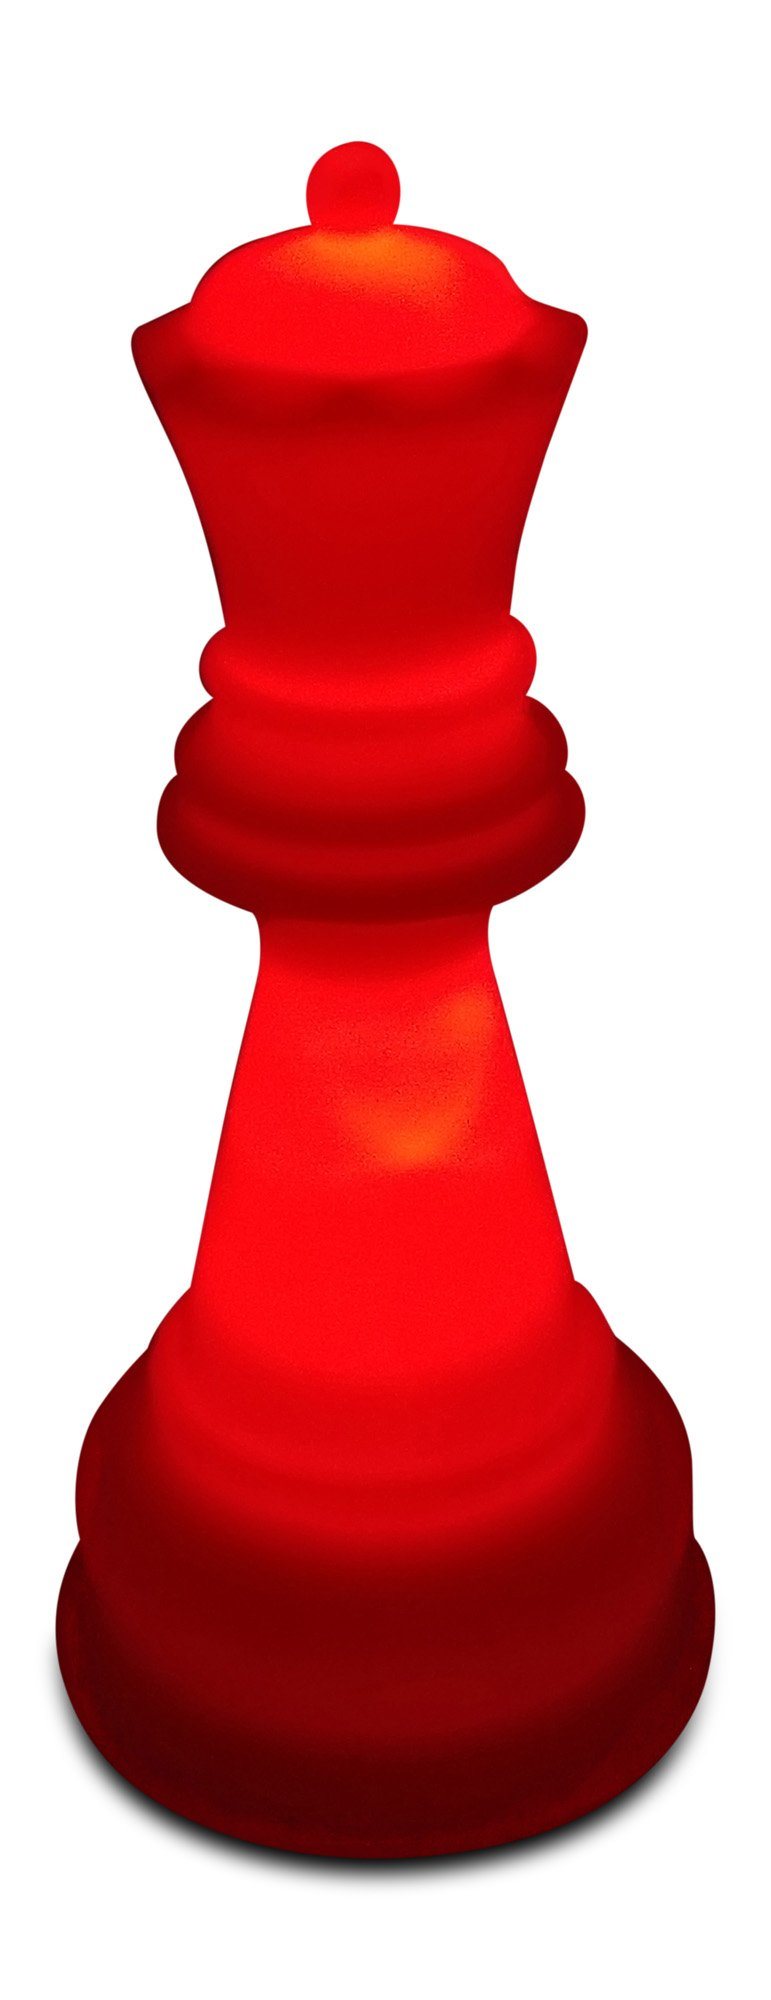 MegaChess 36 Inch Perfect Queen Light-Up Giant Chess Piece - Red |  | MegaChess.com